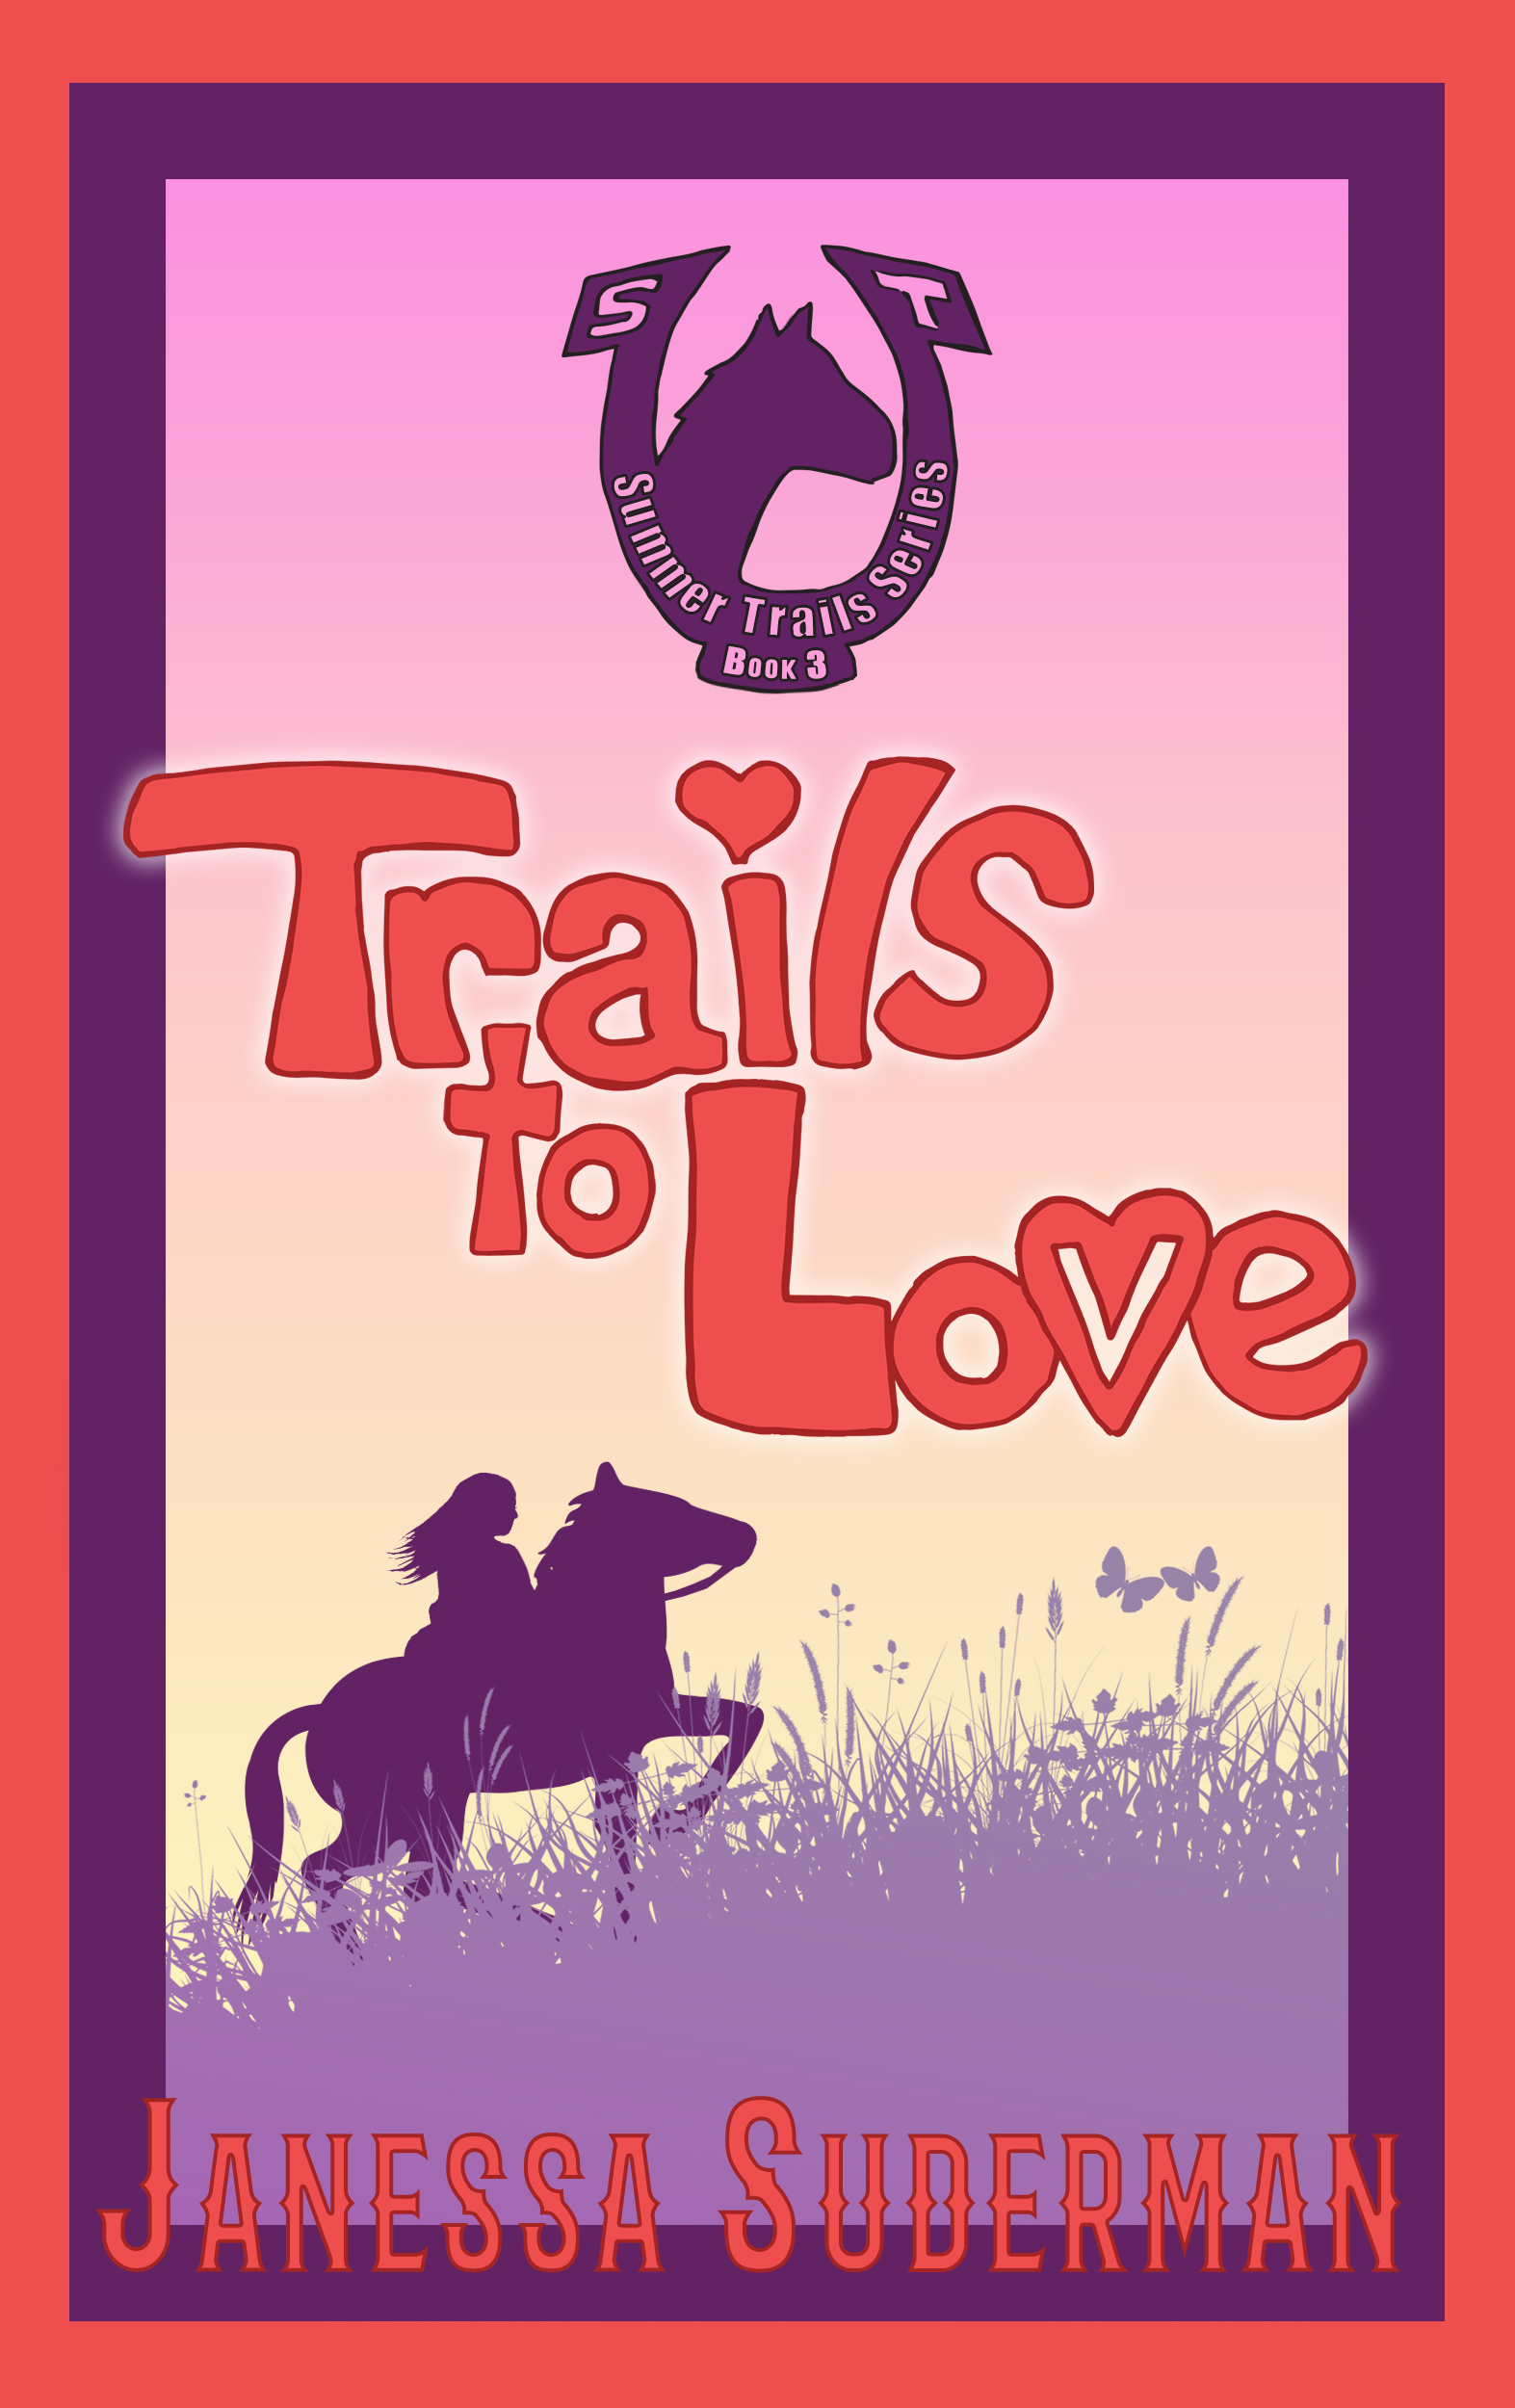 Trails to Love